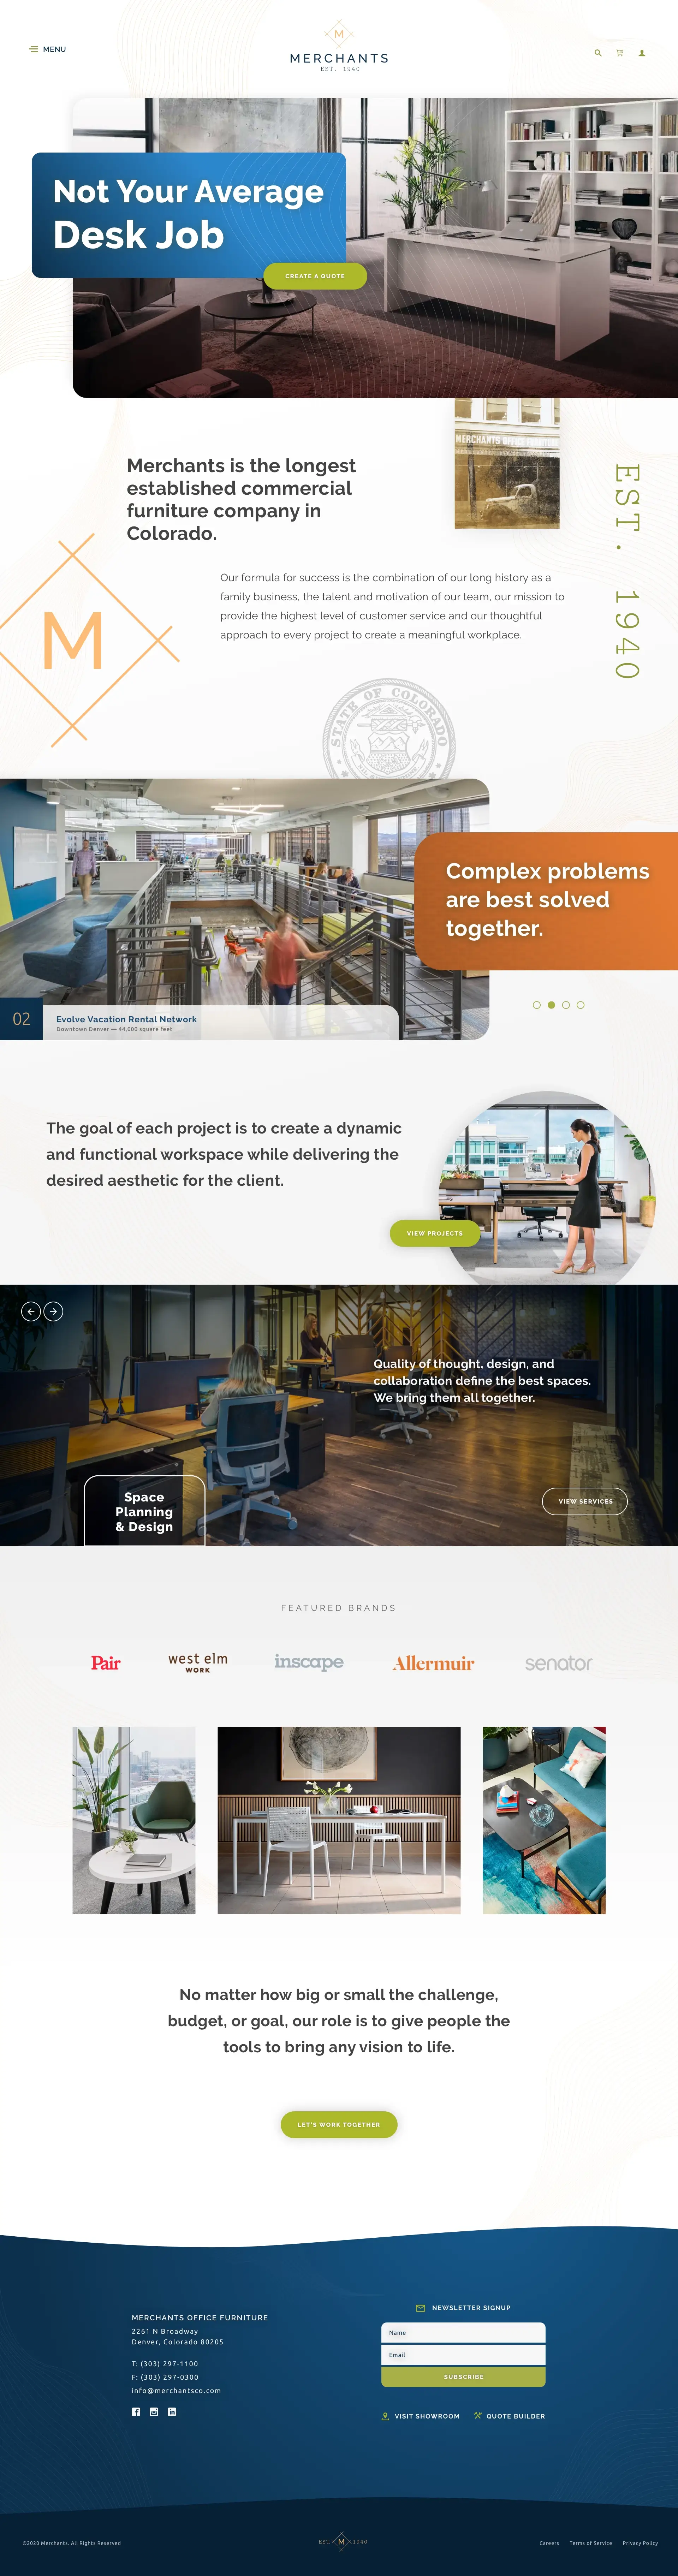 Web design created with Sketch for a long-time Denver furniture company.